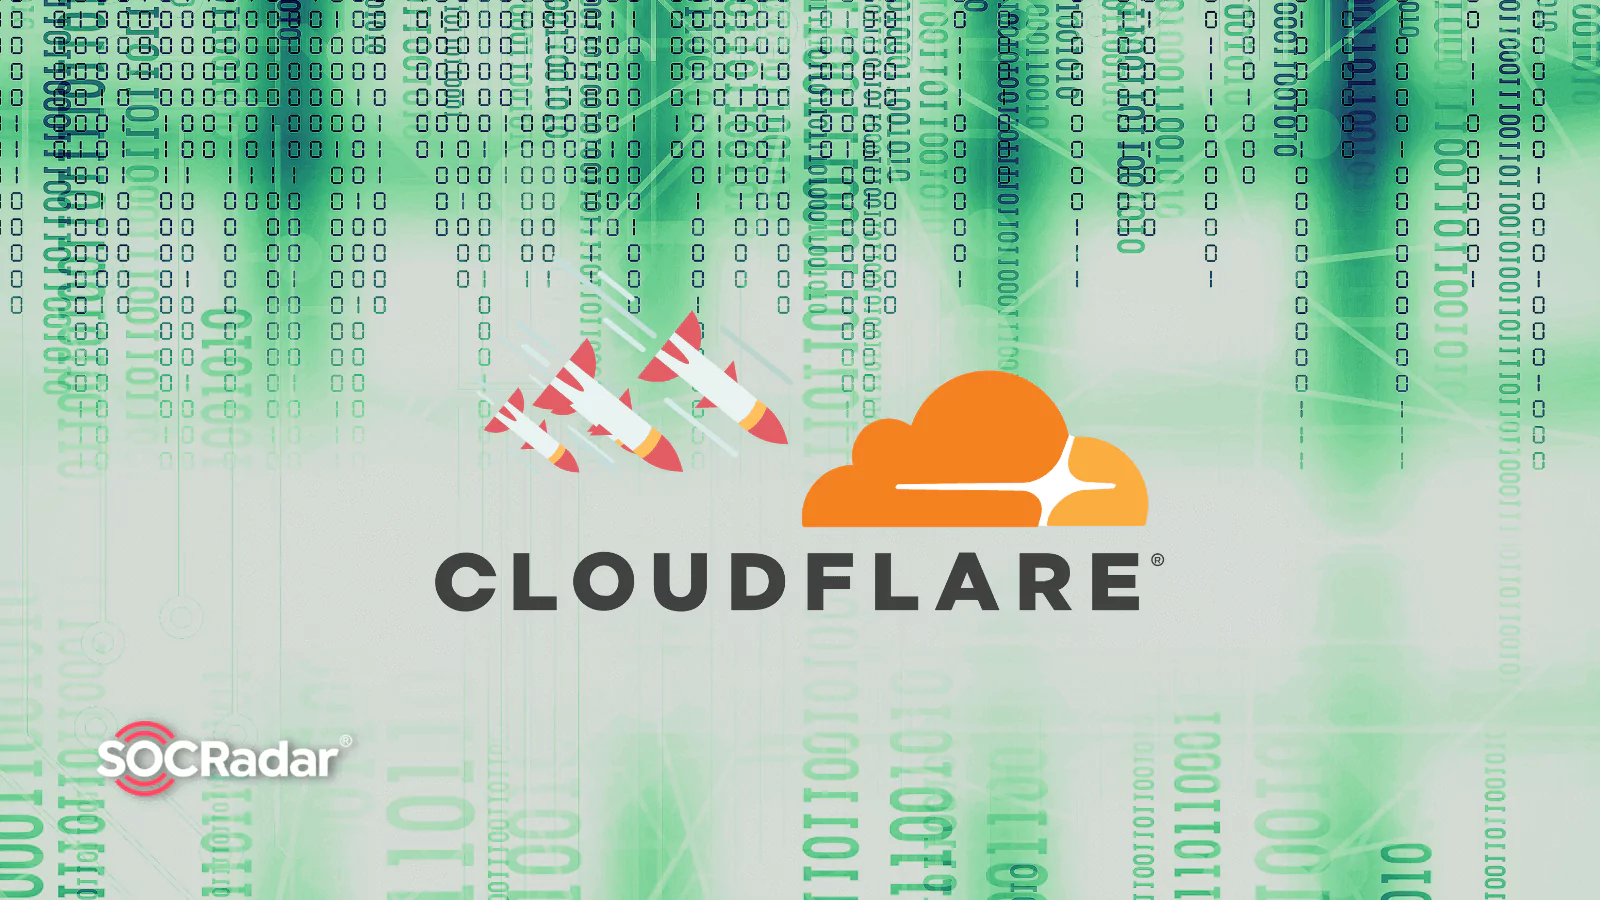 SOCRadar® Cyber Intelligence Inc. | Cloudflare Thwarts Largest DDoS Attack on Record: 71M Requests